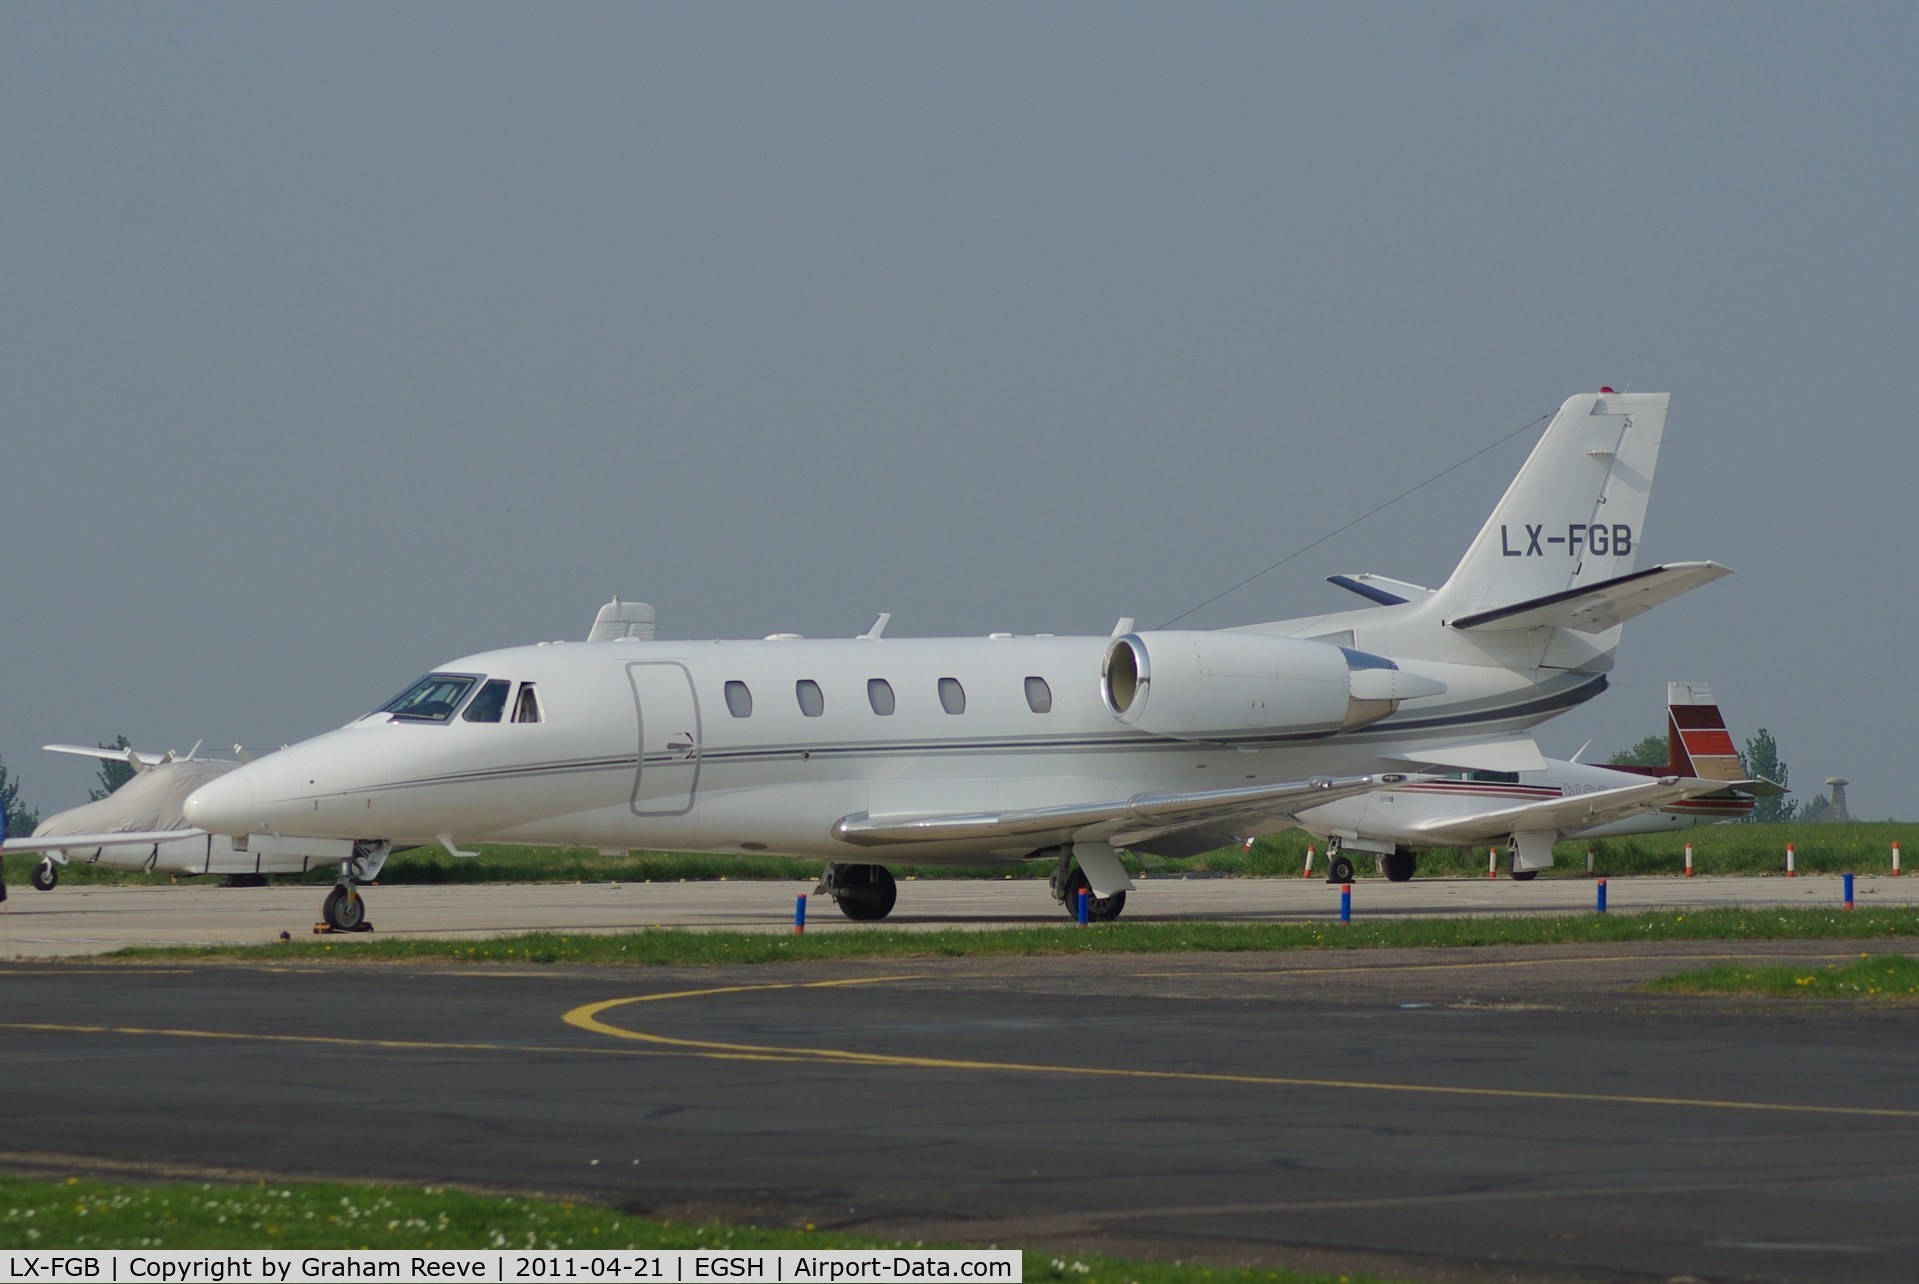 LX-FGB, 2009 Cessna 560 Citation XLS+ C/N 560-6026, Parked out in the sun.